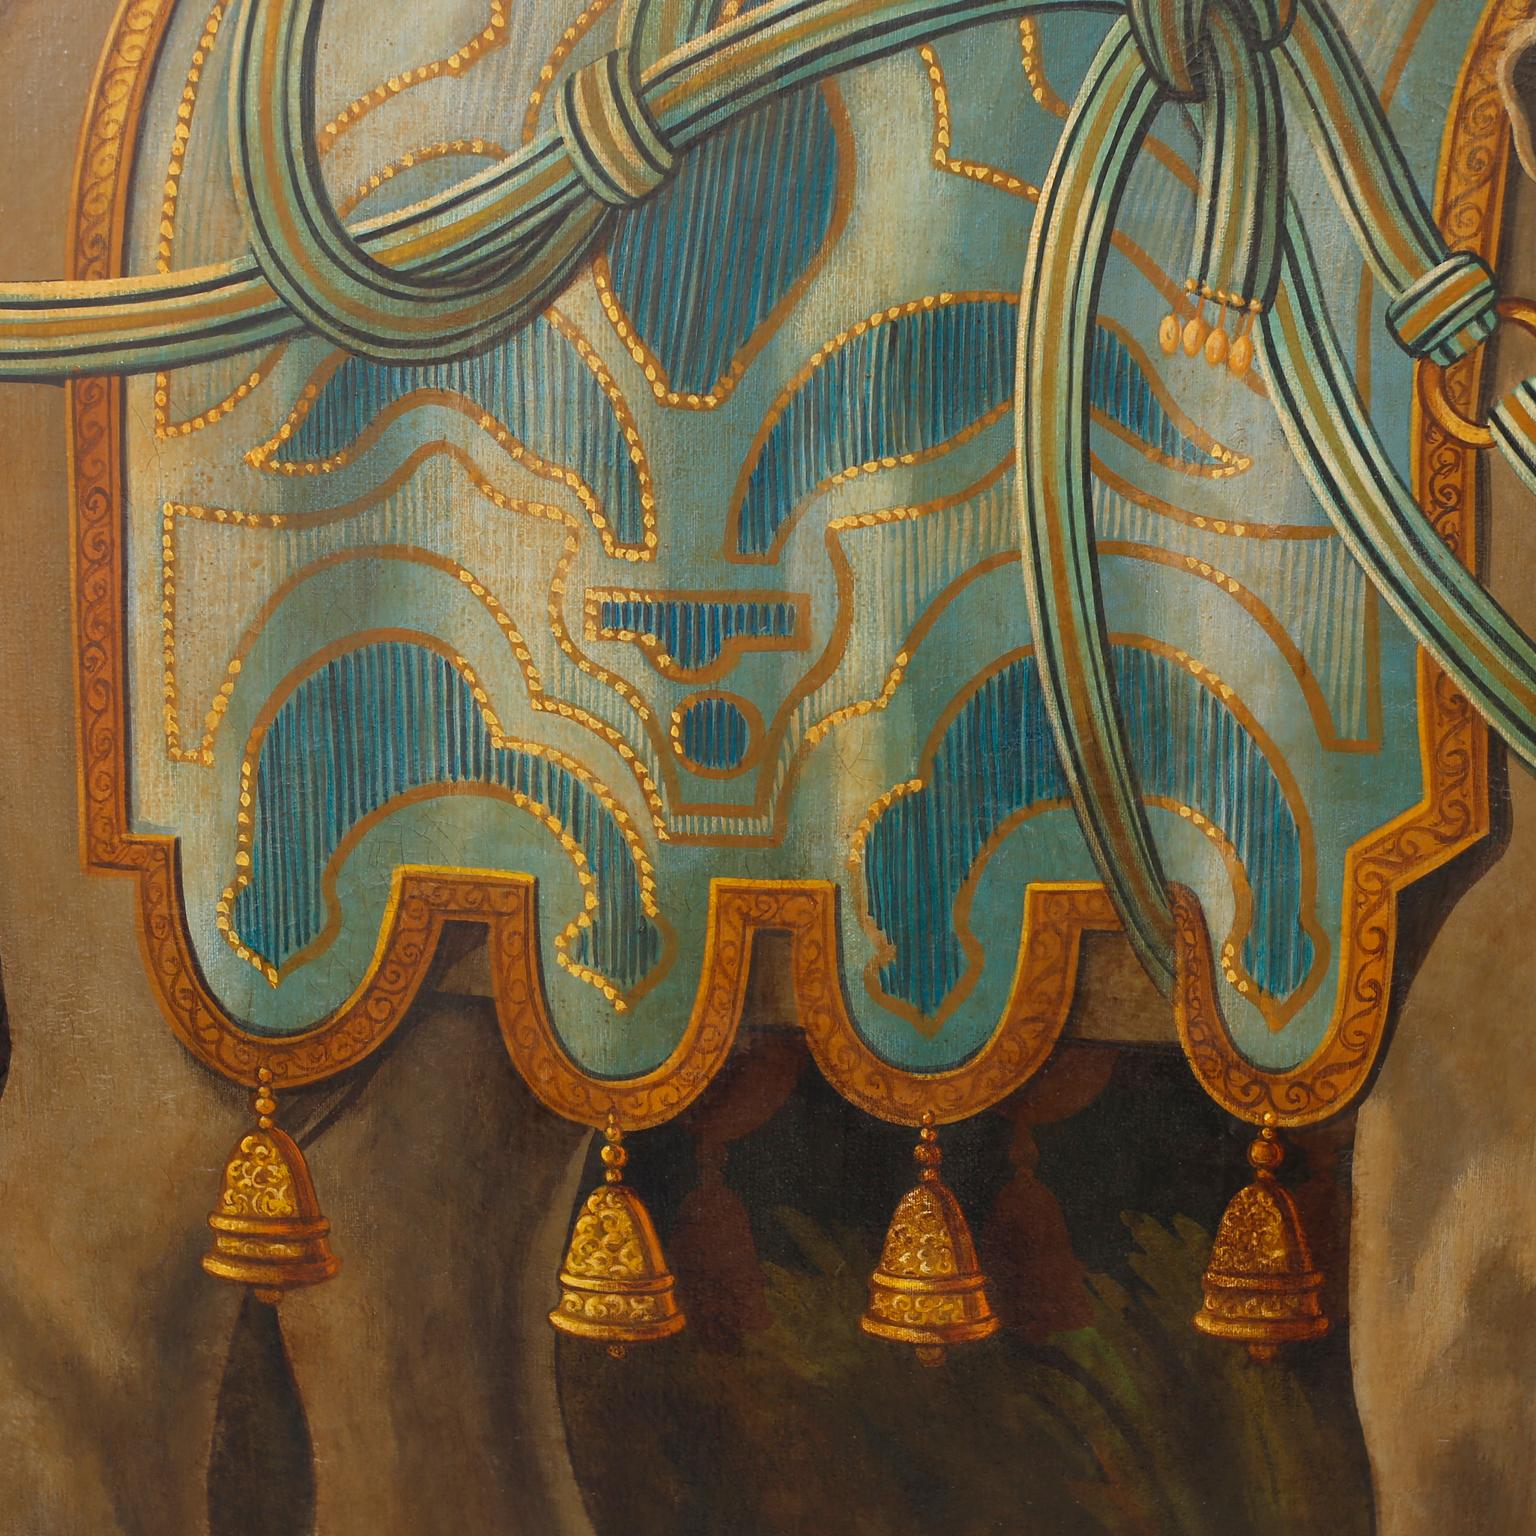 20th Century Oil Painting on Canvas of an Elephant by William Skilling